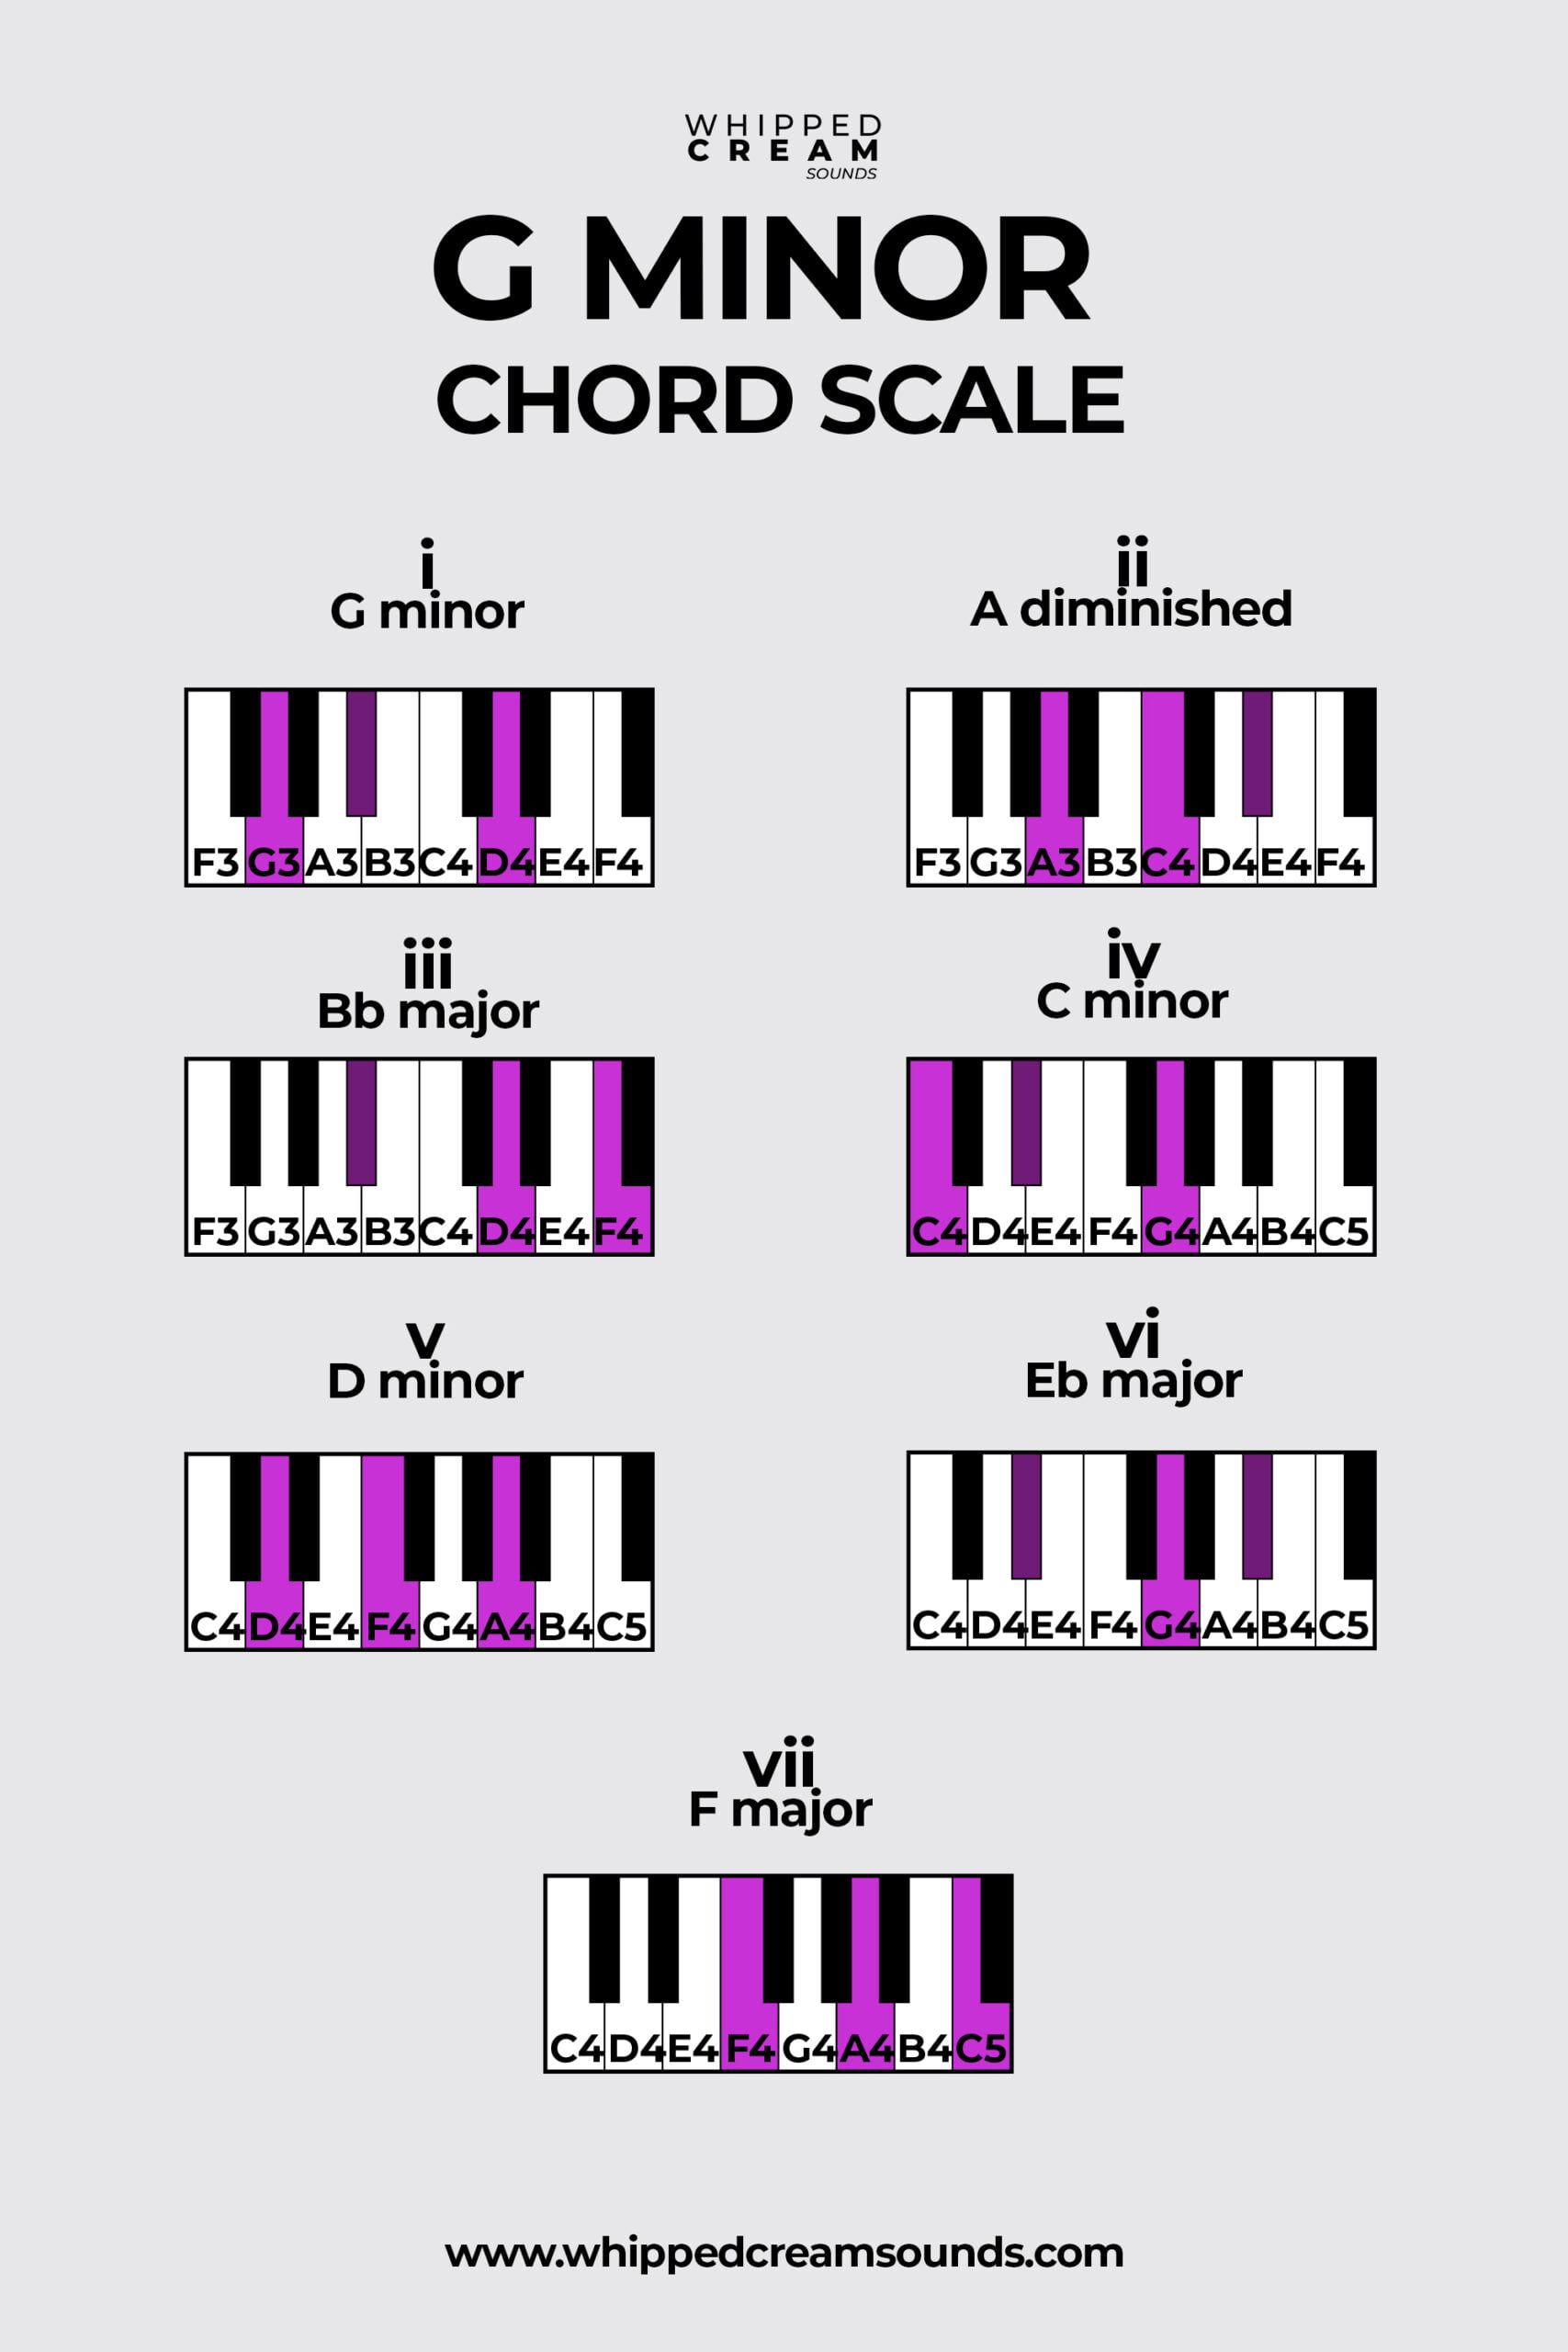 G Minor Chord Scale, Chords in The Key of G Minor